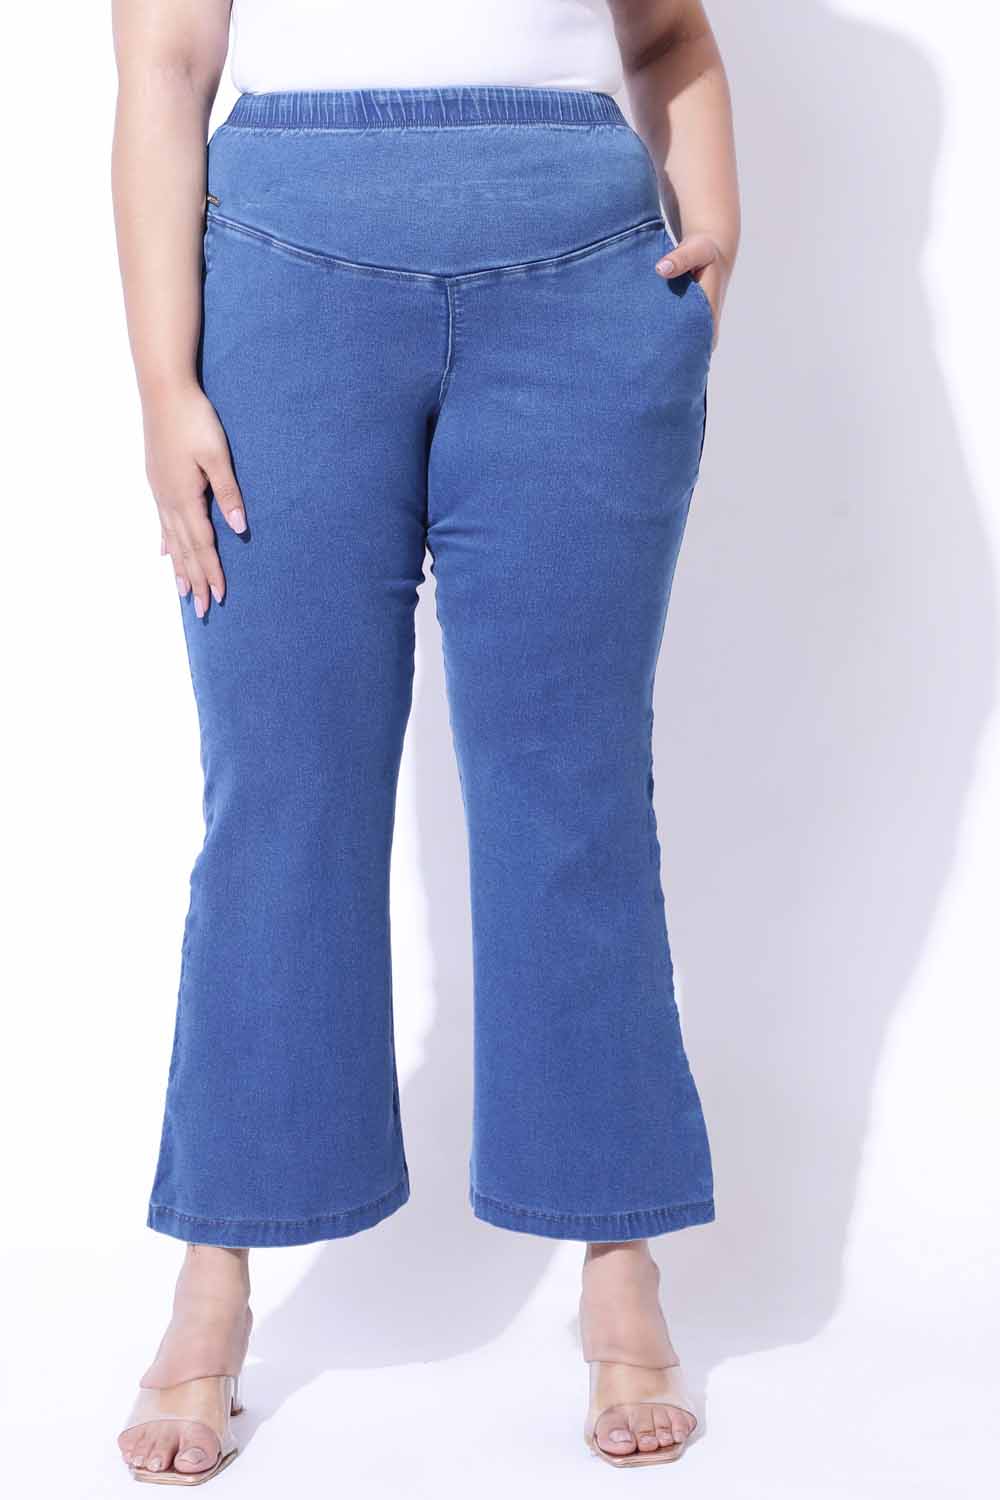 Ladies Bell Bottom Jeans at Rs 250/piece, Women Bottom Jeans in Mumbai